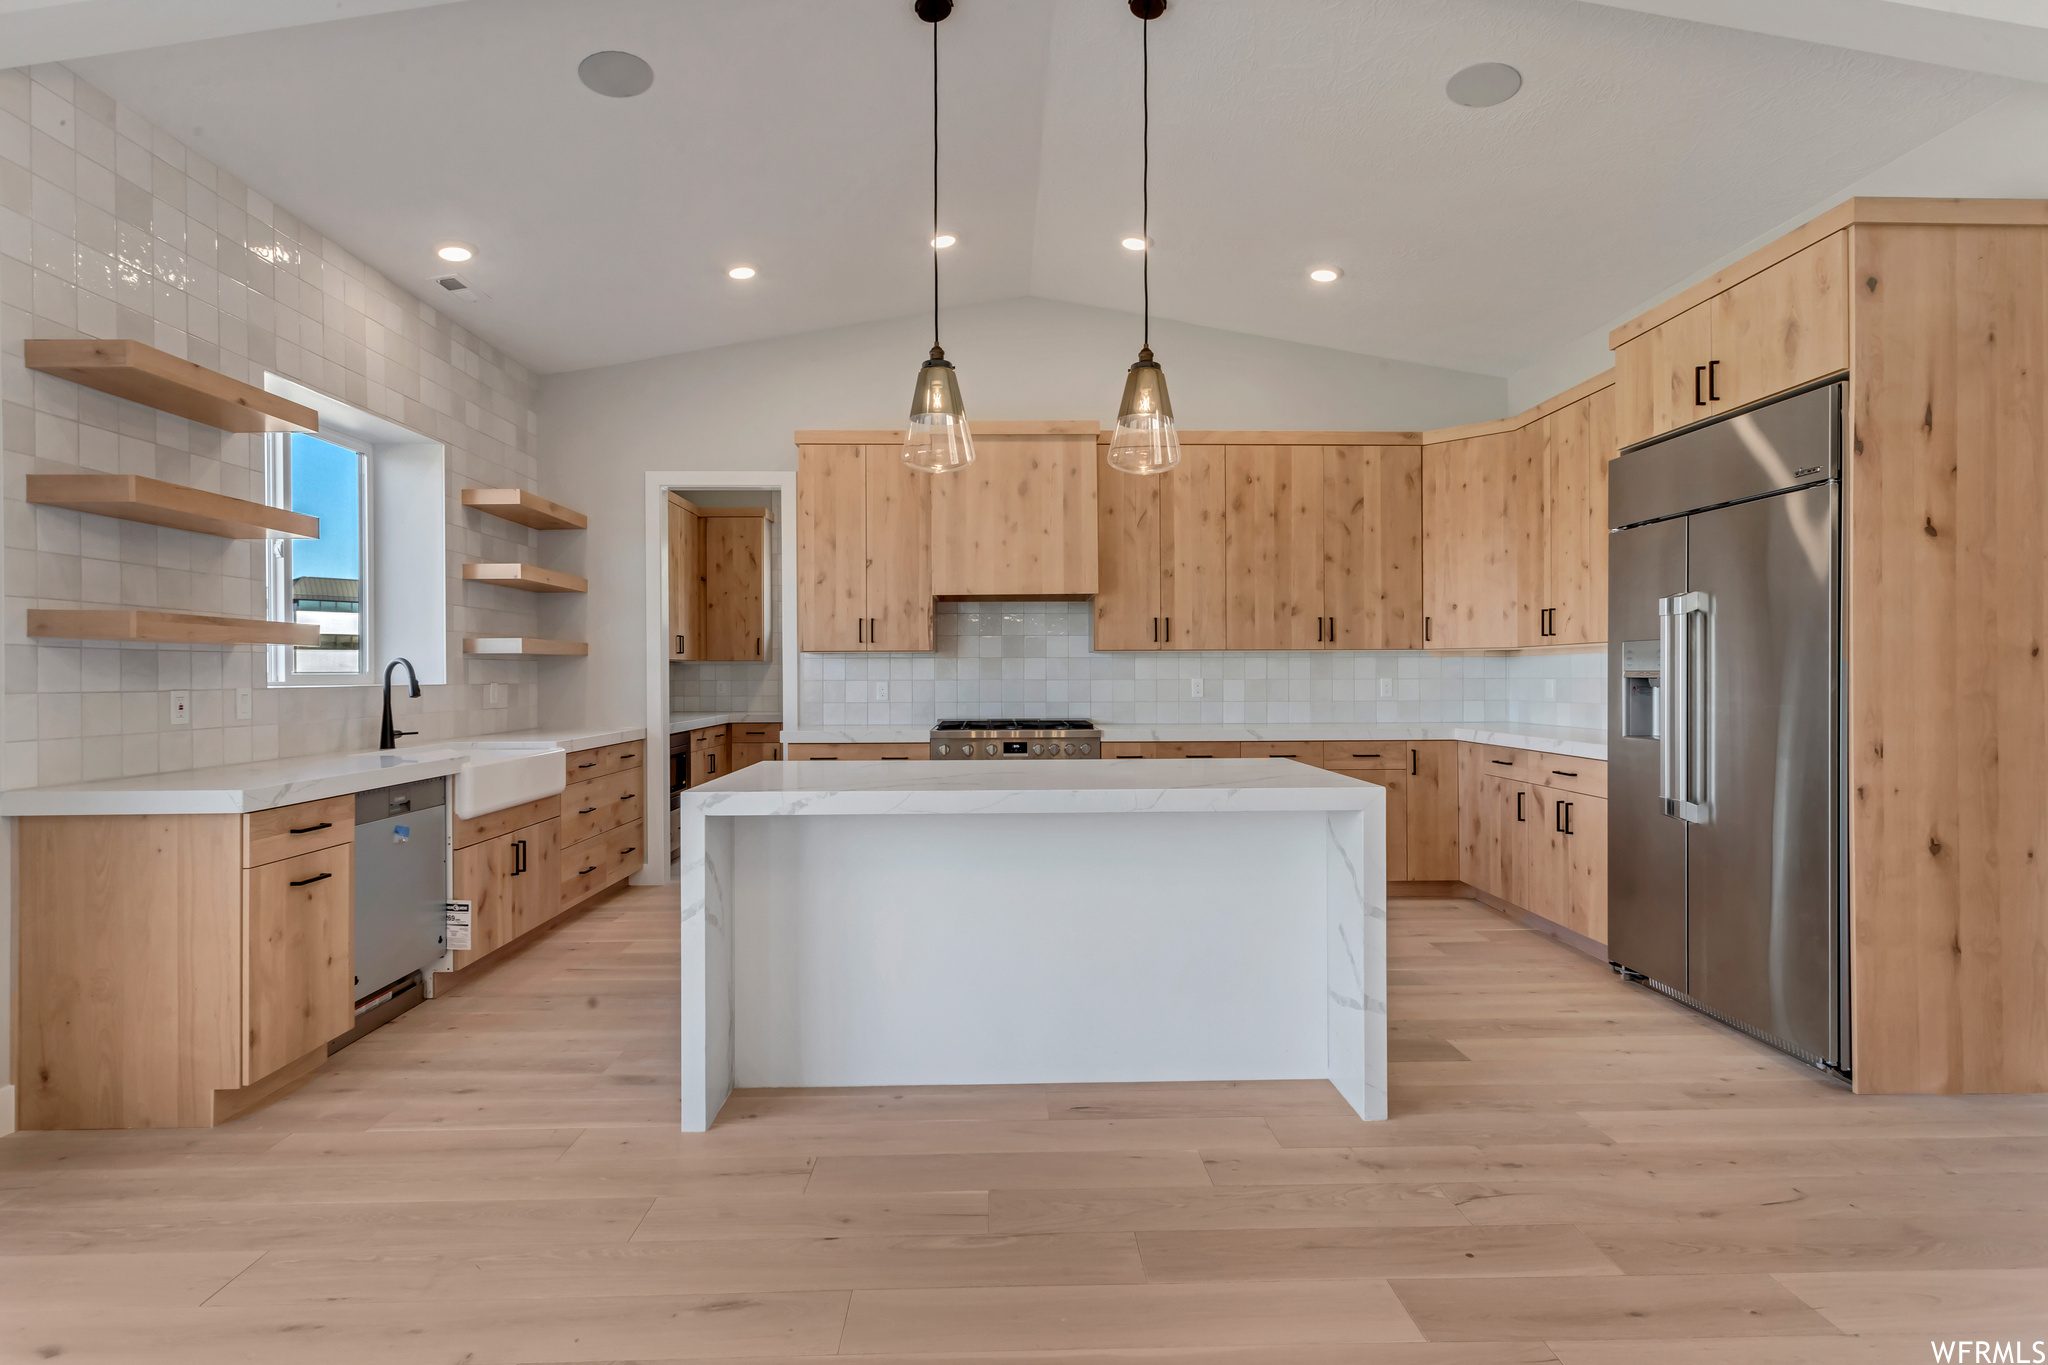 This owner chose to add waterfall countertops to the island and light maple cabinets